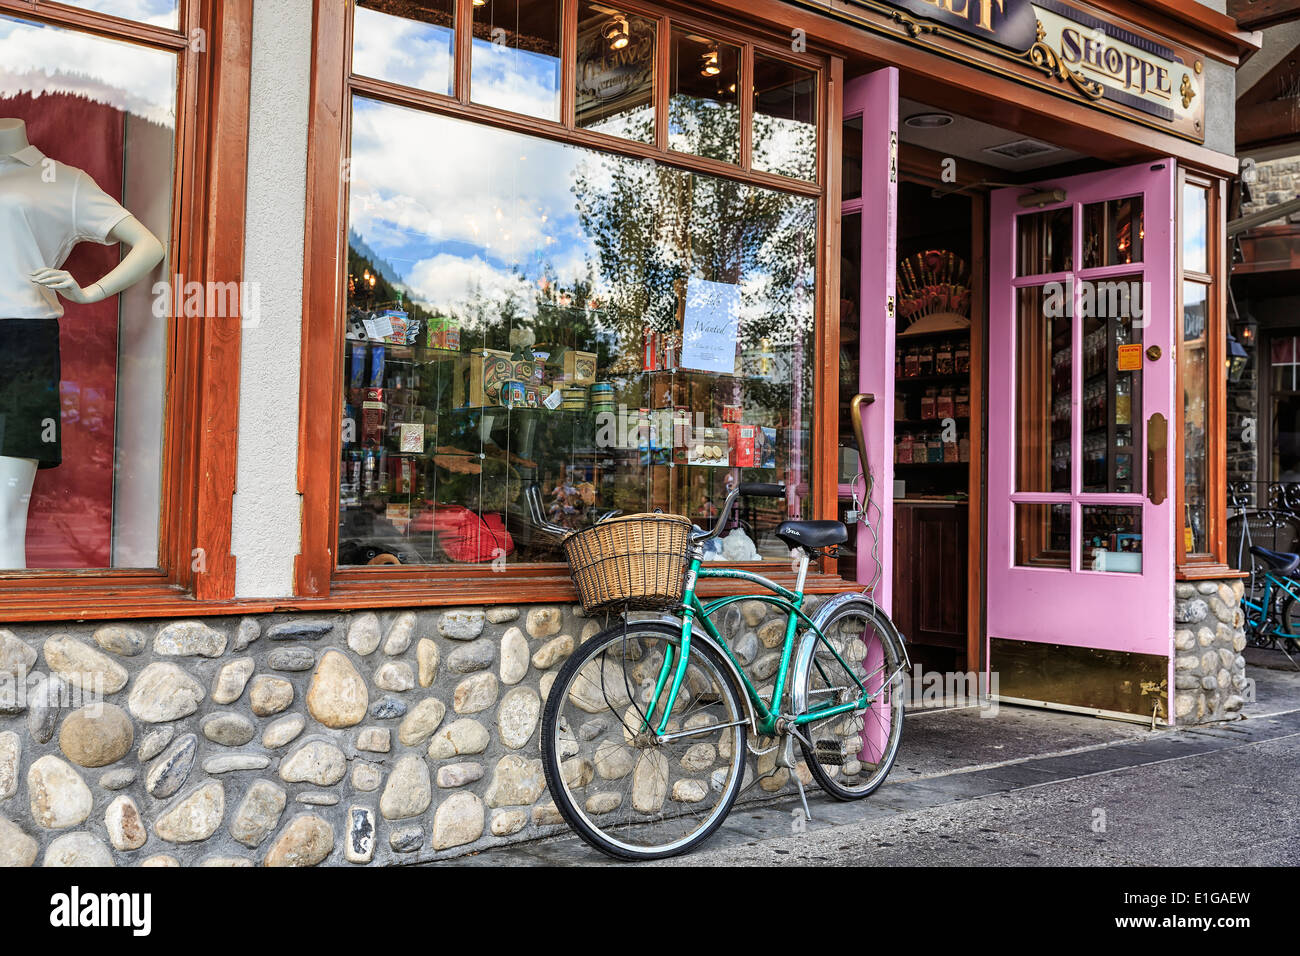 Cruiser bicycle with basket outside a storefront, Banff, Alberta, Canada Stock Photo